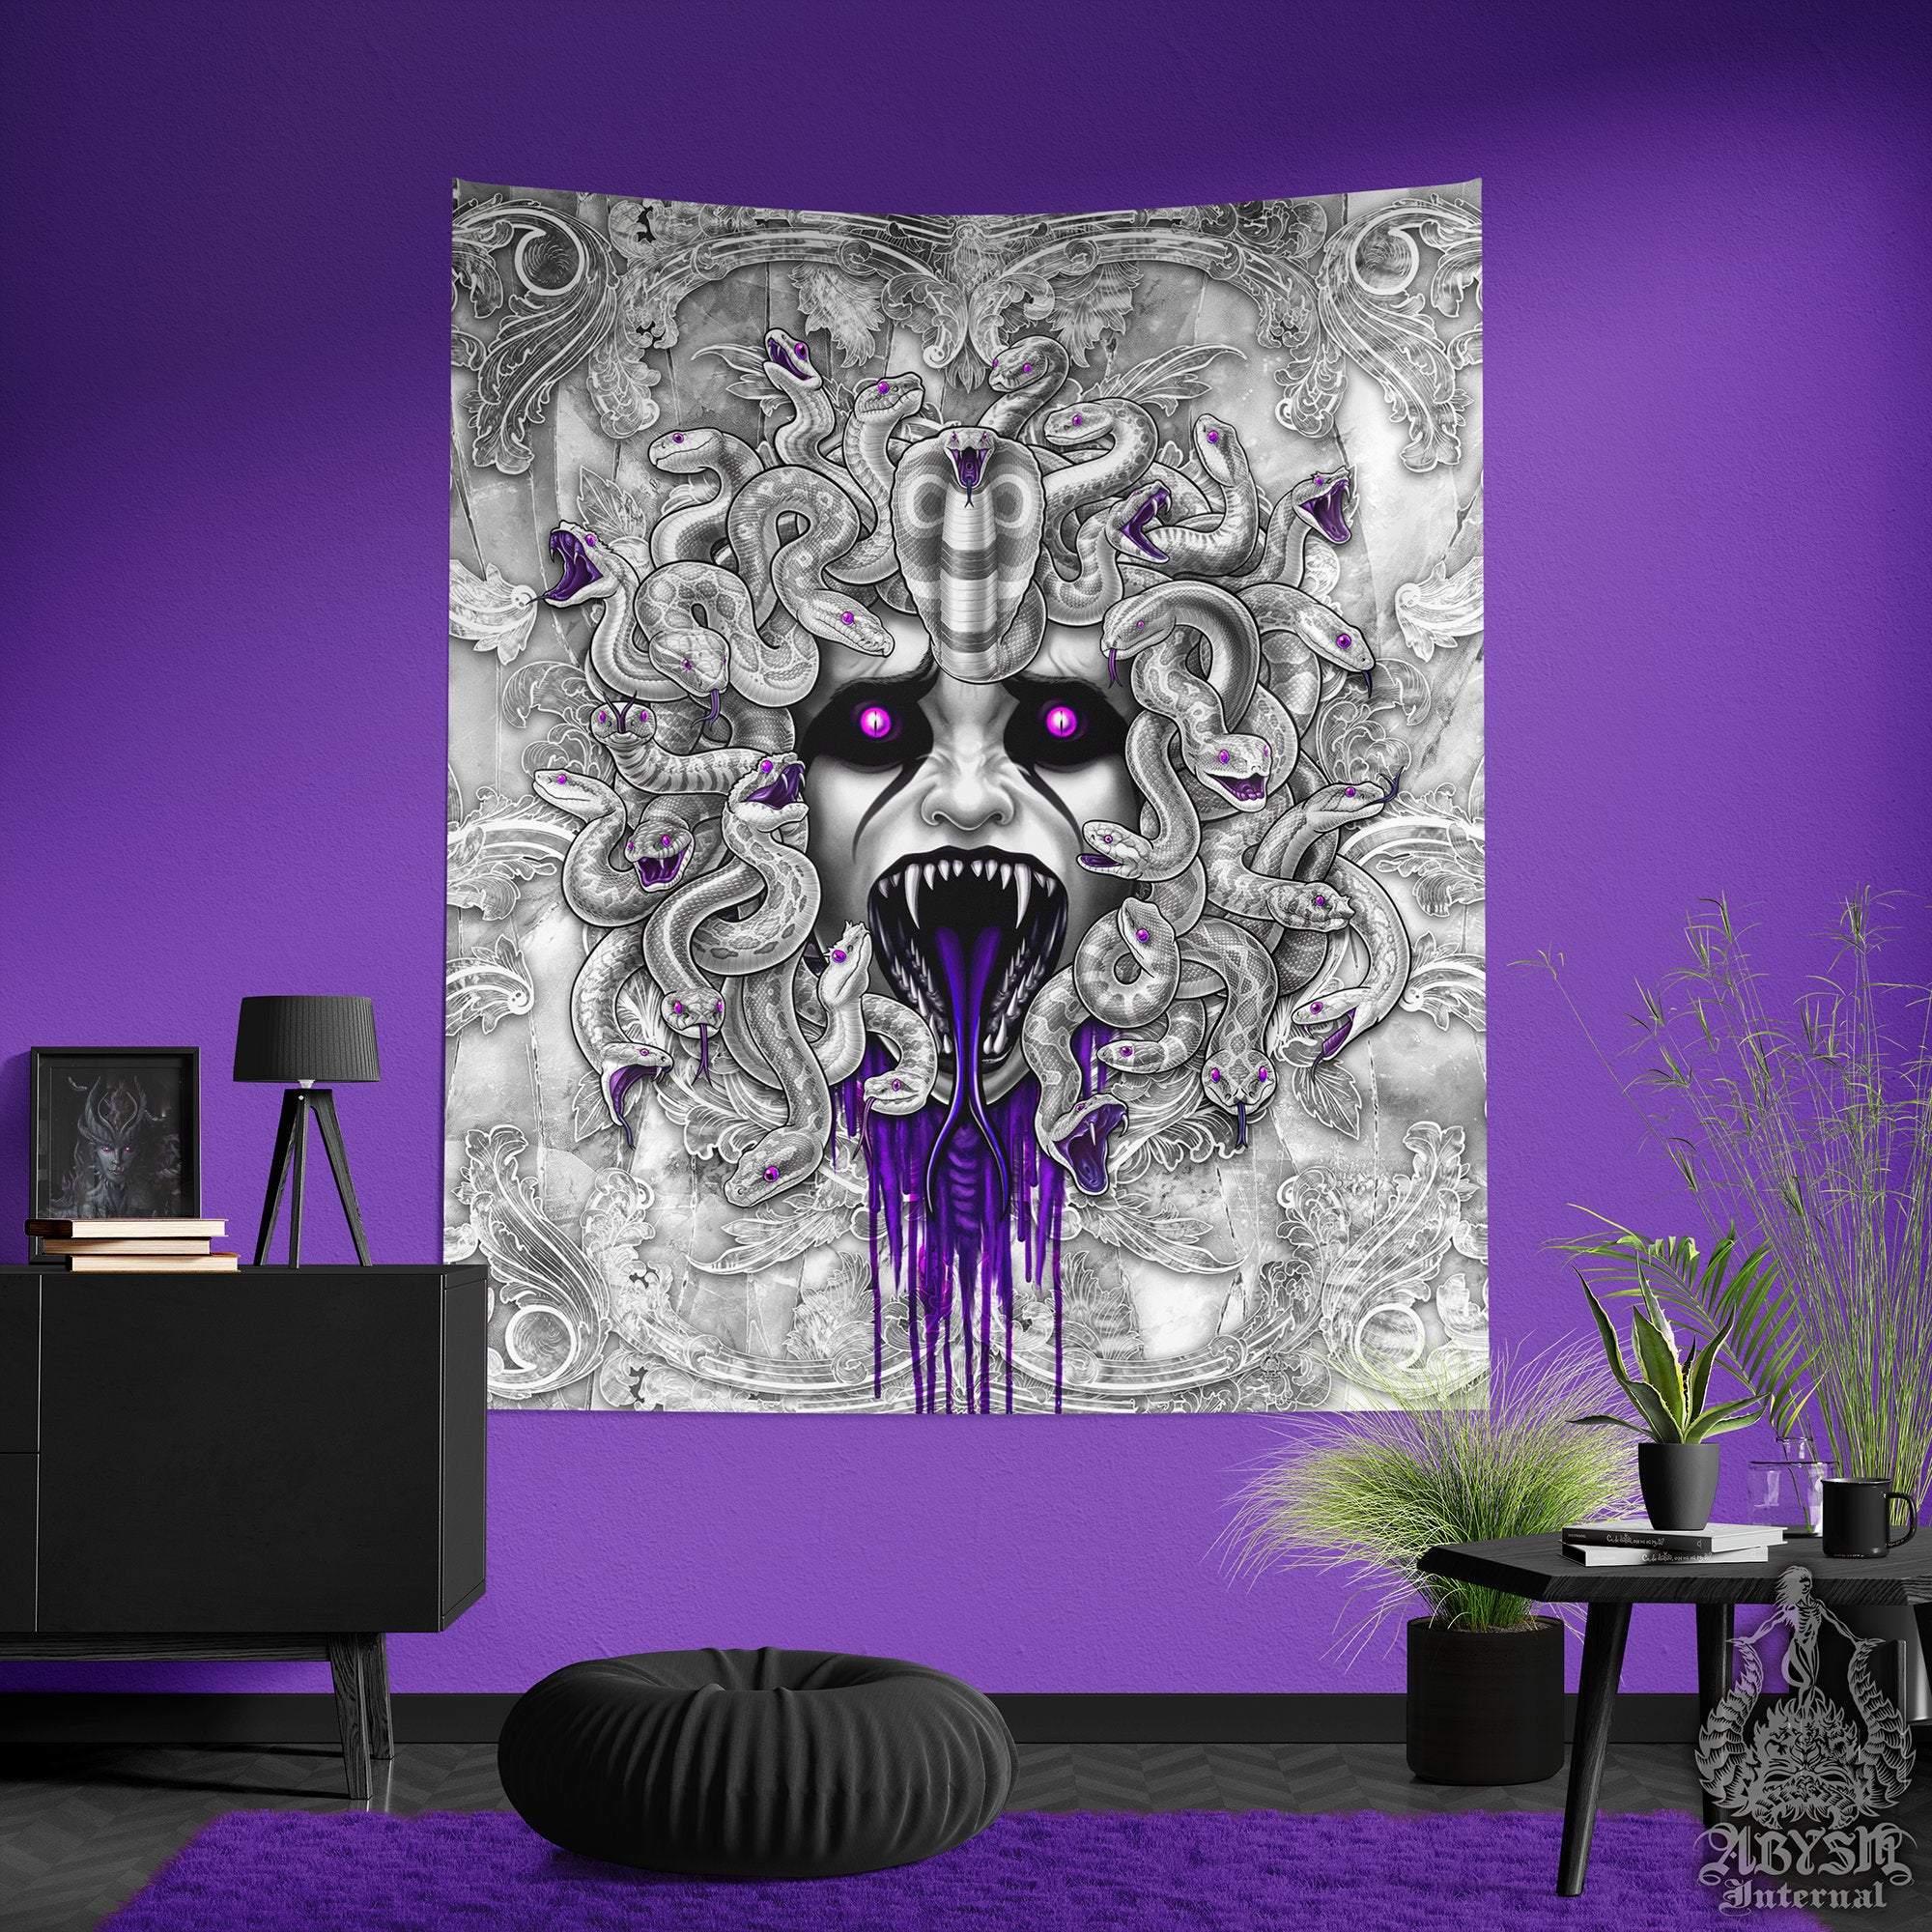 White Goth Tapestry, Gothic Wall Hanging, Horror Home Decor, Art Print - Medusa & Snakes, Purple, 3 Faces - Abysm Internal